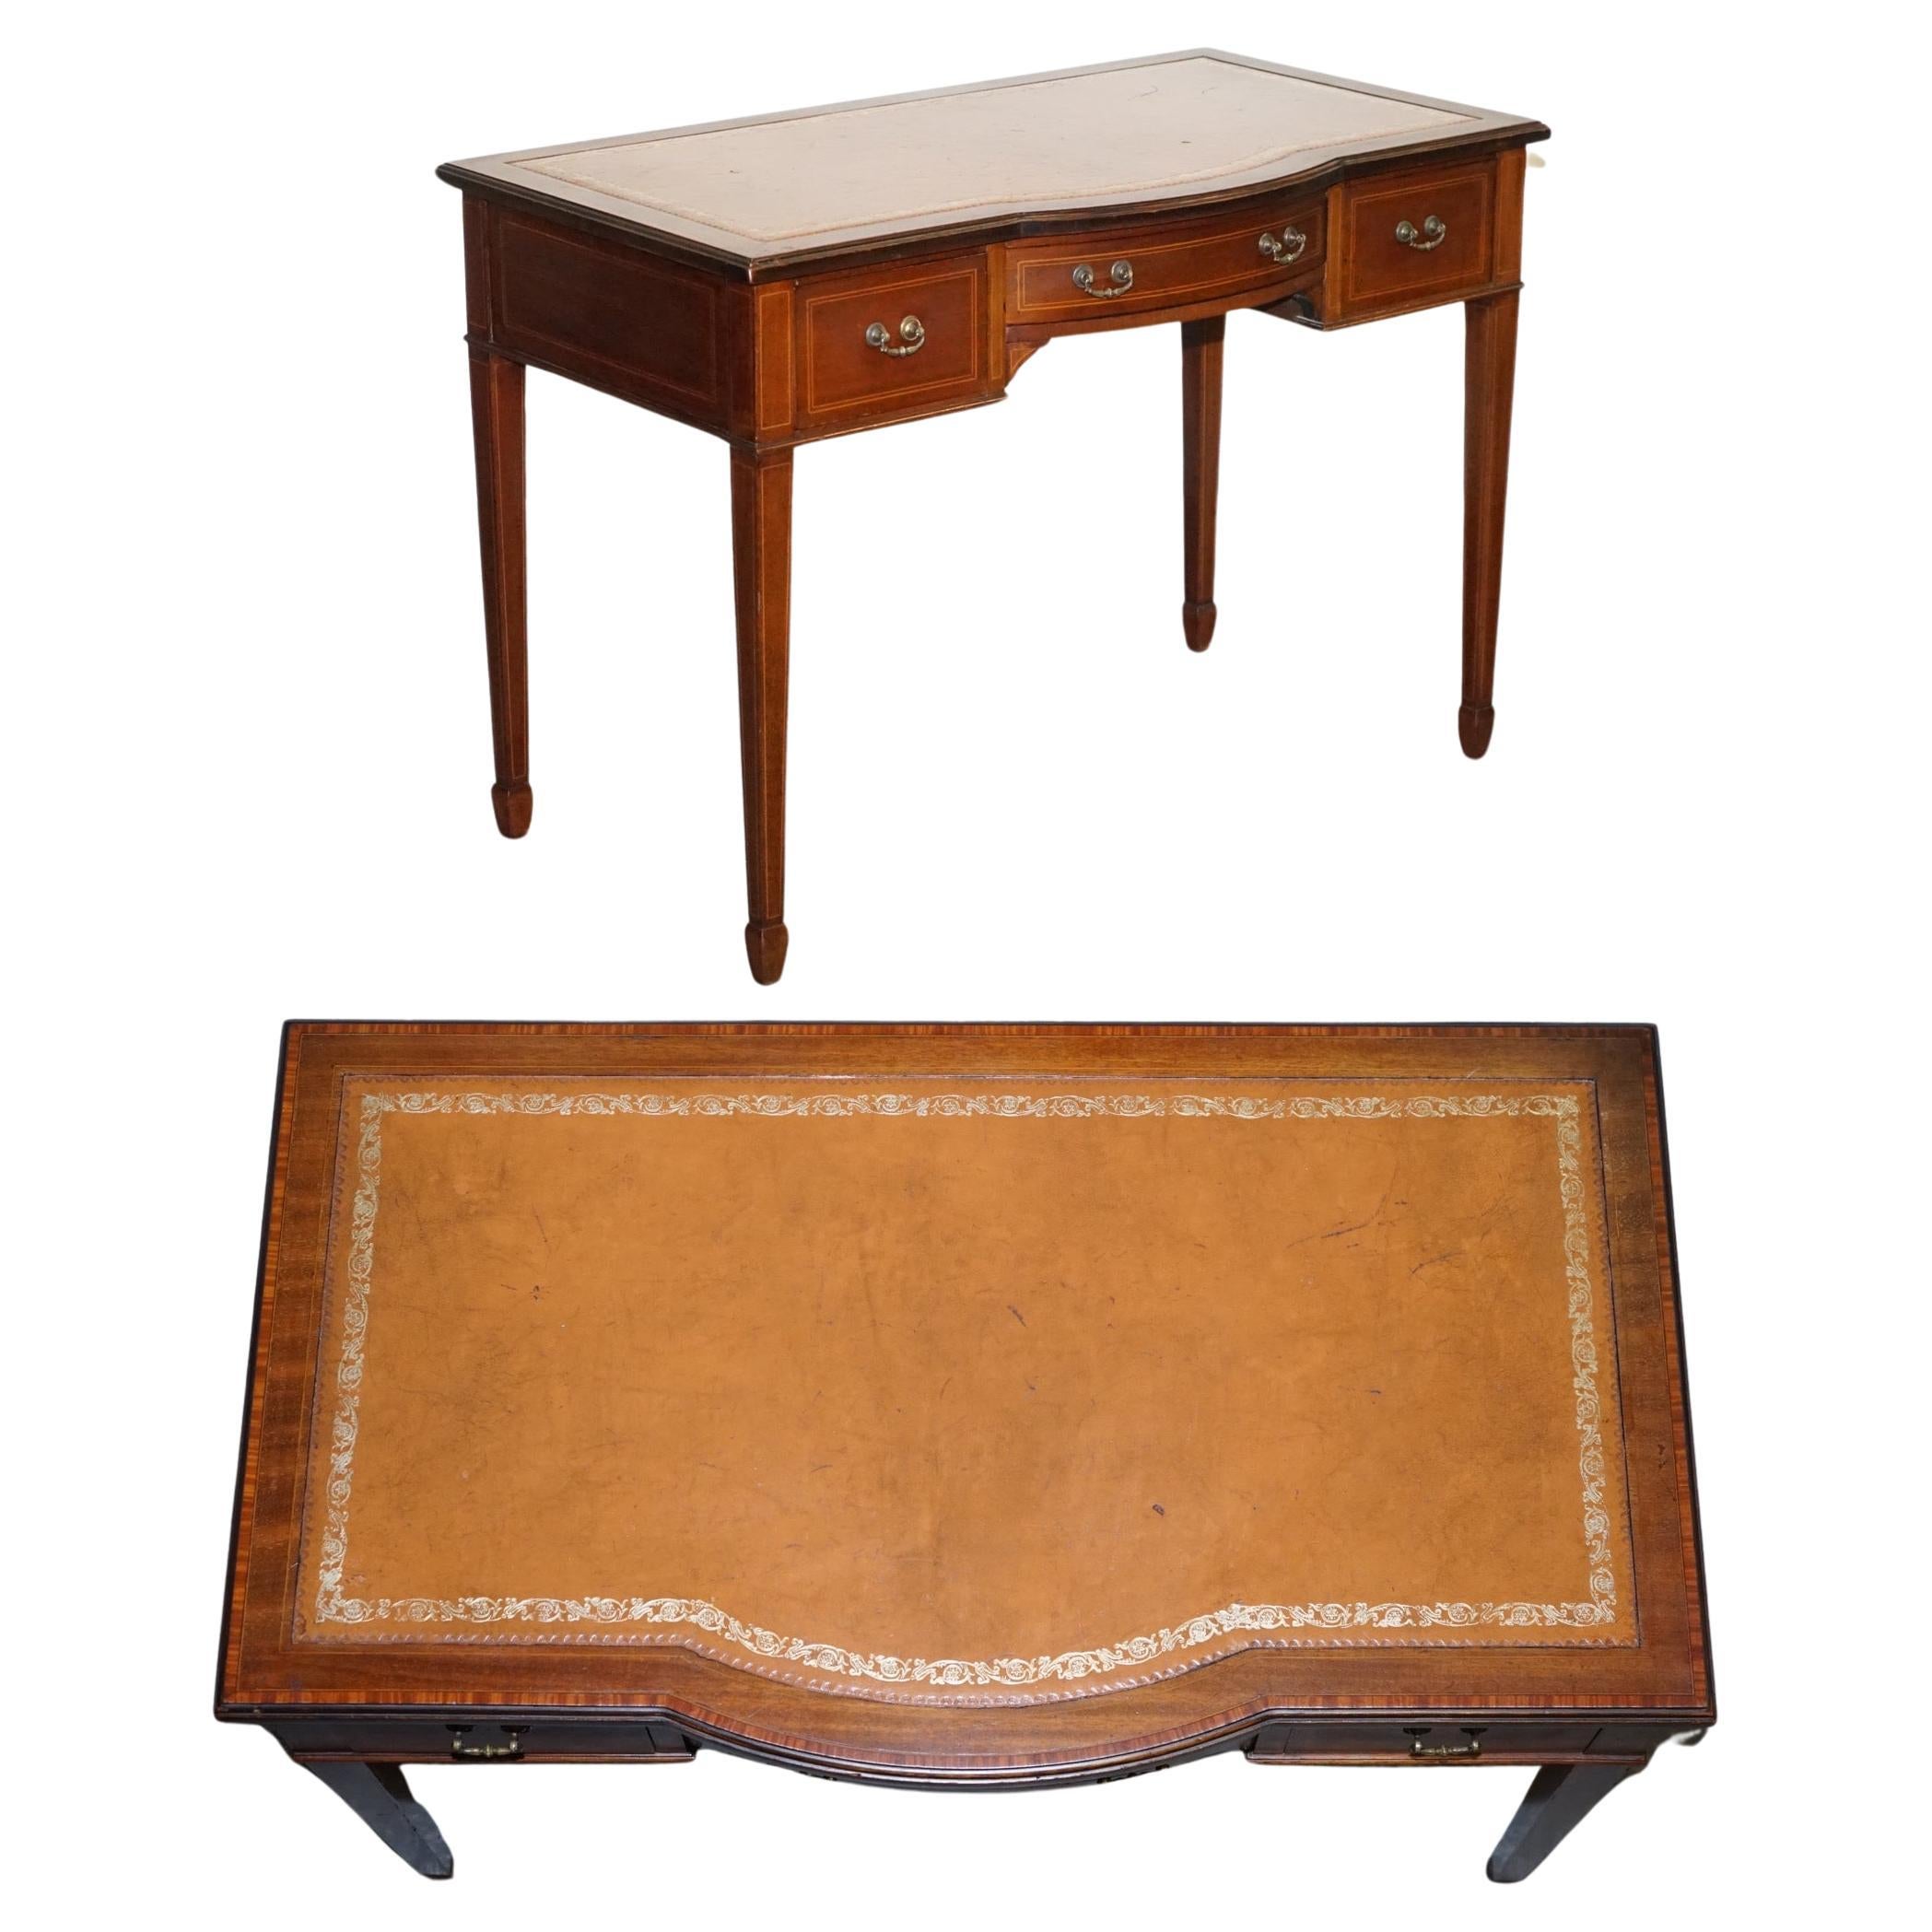 EDWARDIAN 1880er Jahre STAMPED MAPLE & CO BROWN LEATHER SHERATON WRITING DESK TABLE  im Angebot